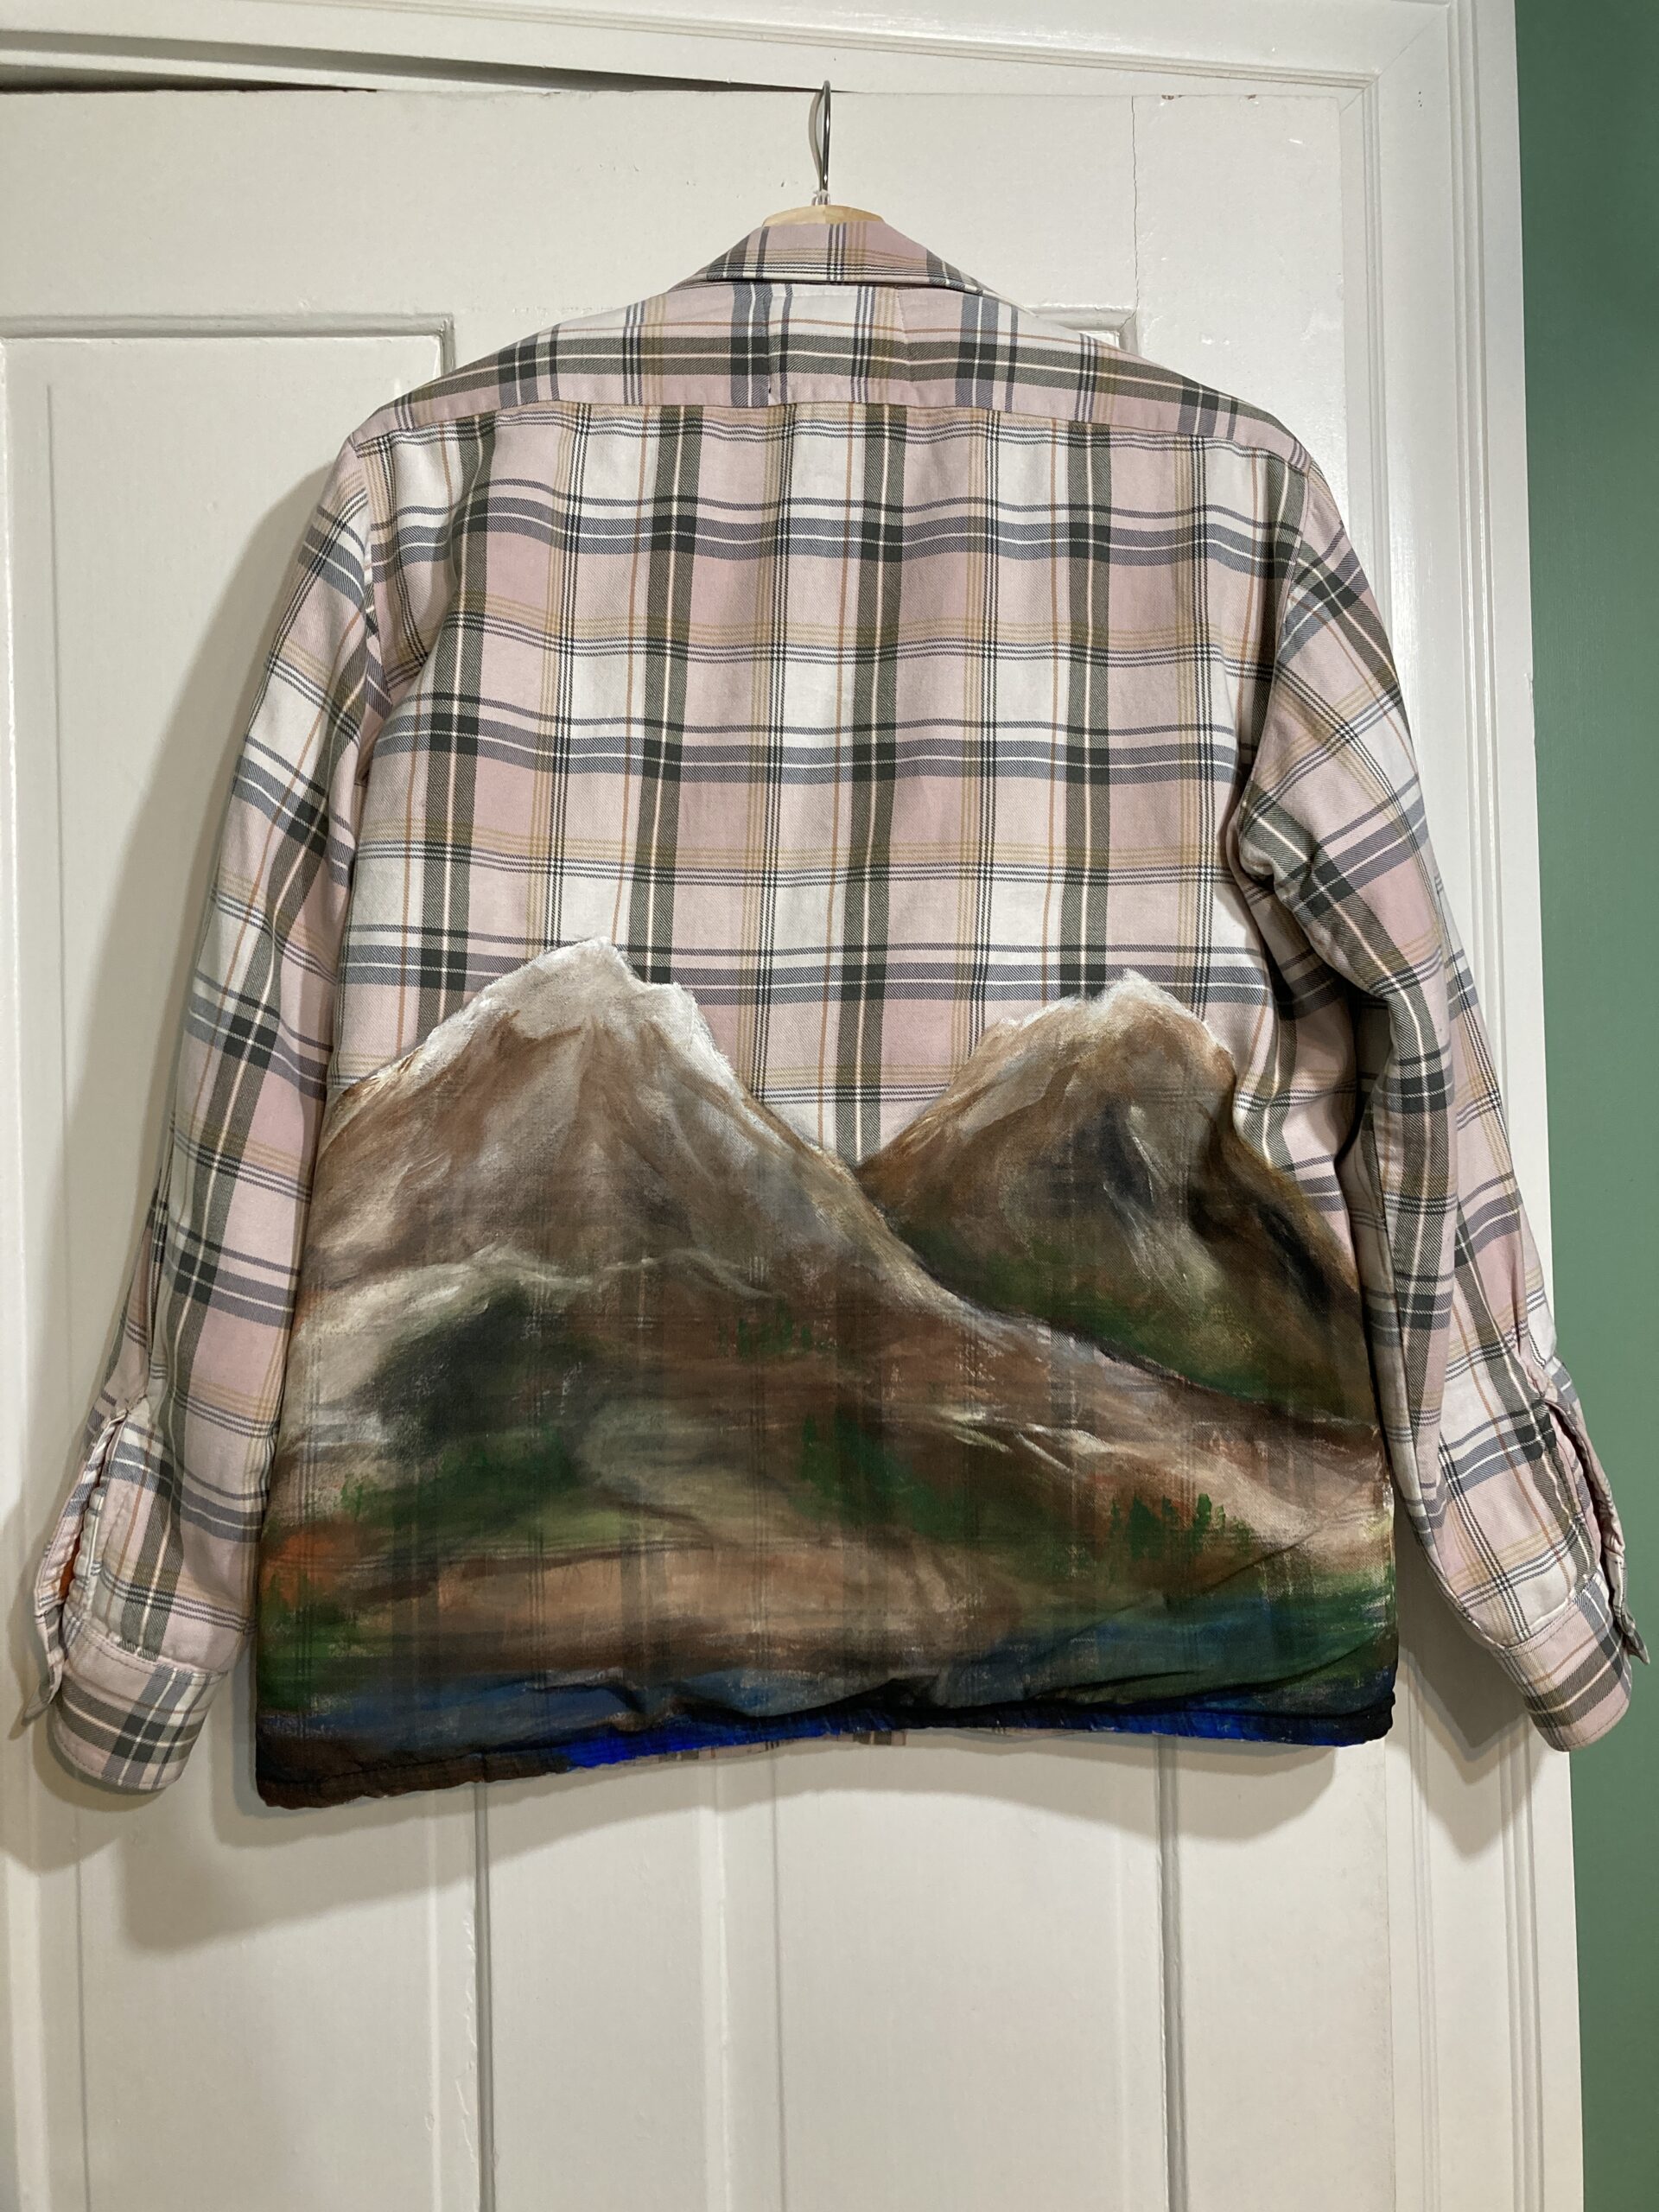 A plaid jacket with mountains on it.